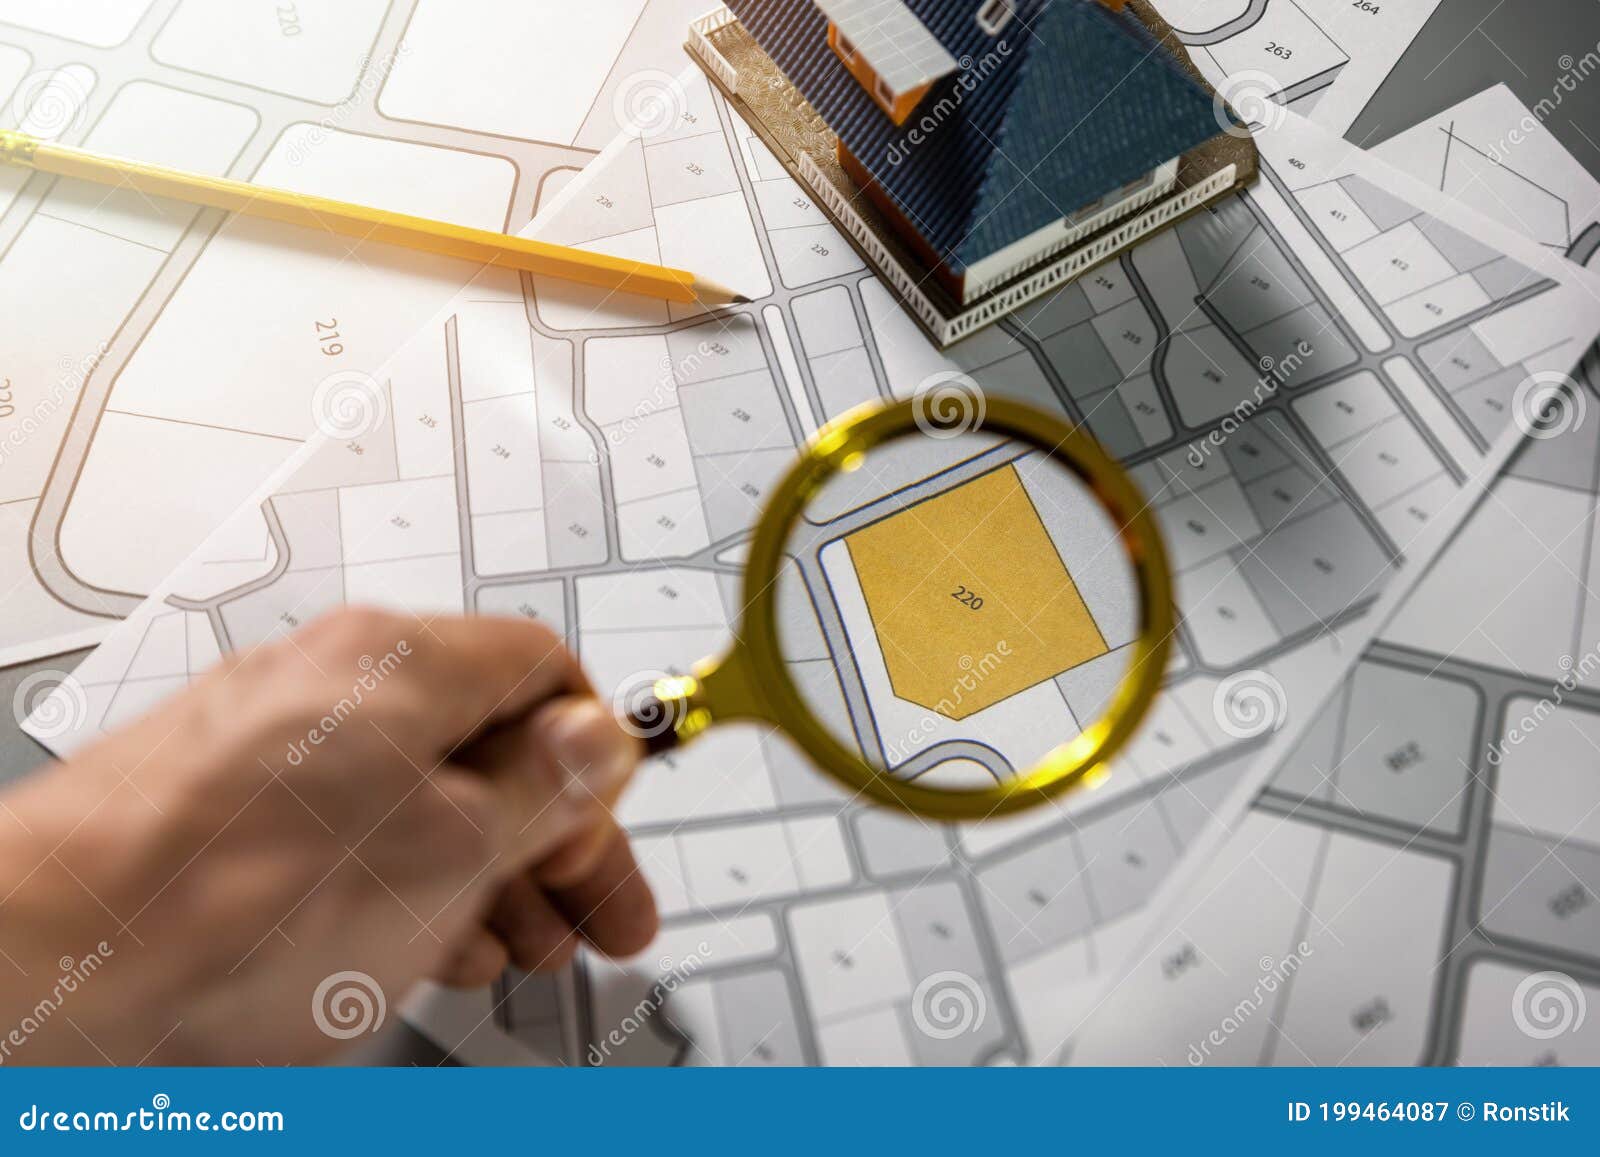 searching building plot for family house construction - hand with magnifier on cadastre map